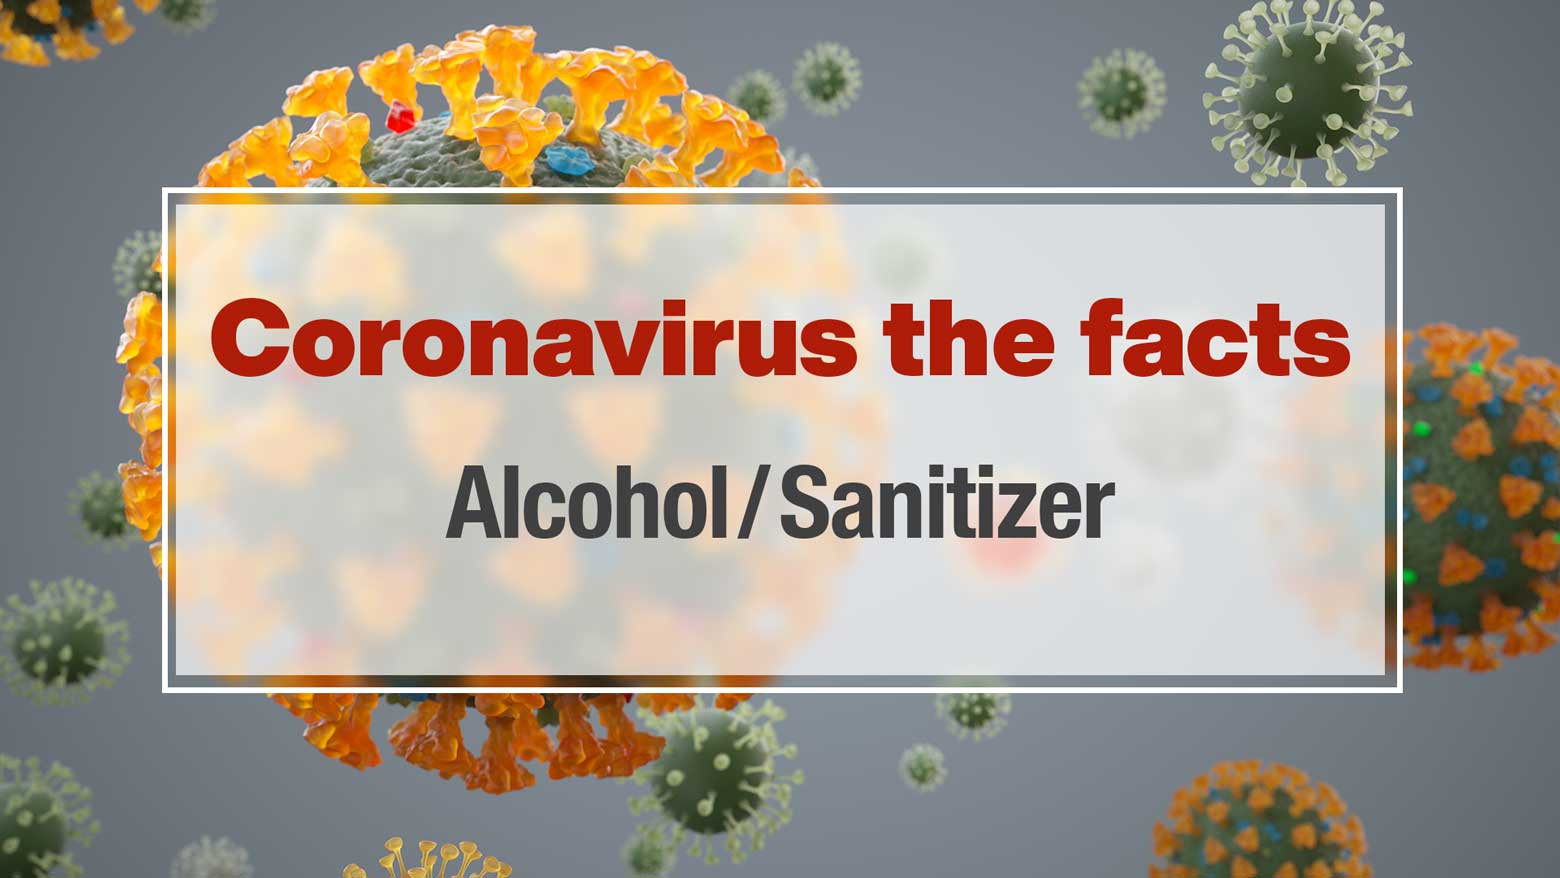 Can strong alcoholic drinks be used as a substitute for sanitizer?